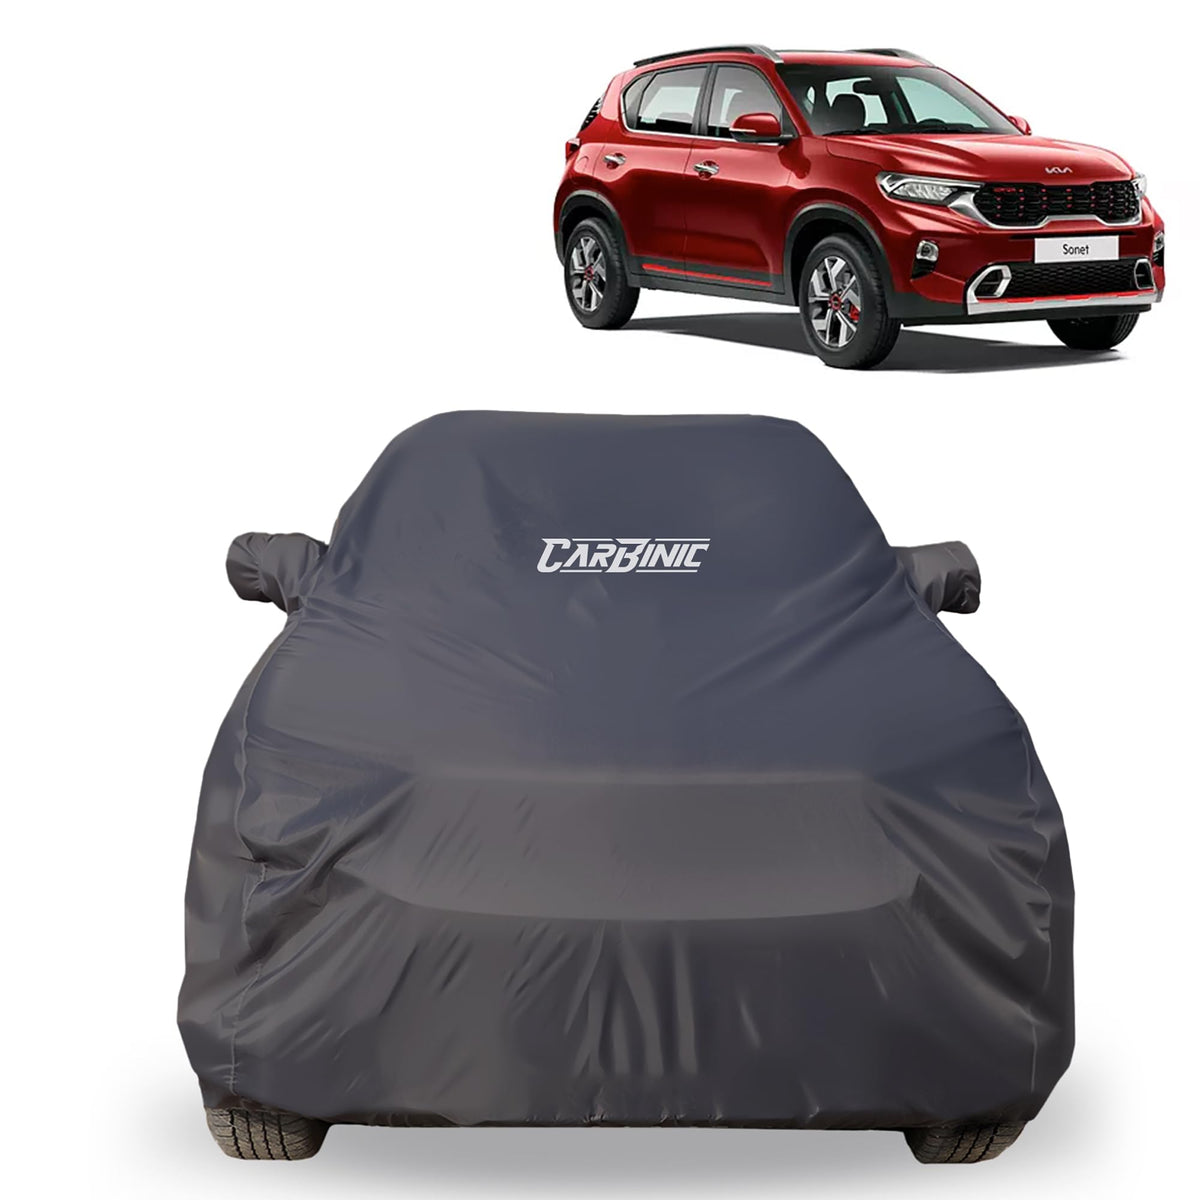 CARBINIC Car Body Cover for Hyundai Kona 2020 | Water Resistant, UV Protection Car Cover | Scratchproof Body Shield | All-Weather Cover | Mirror Pocket & Antenna | Car Accessories Dusk Grey